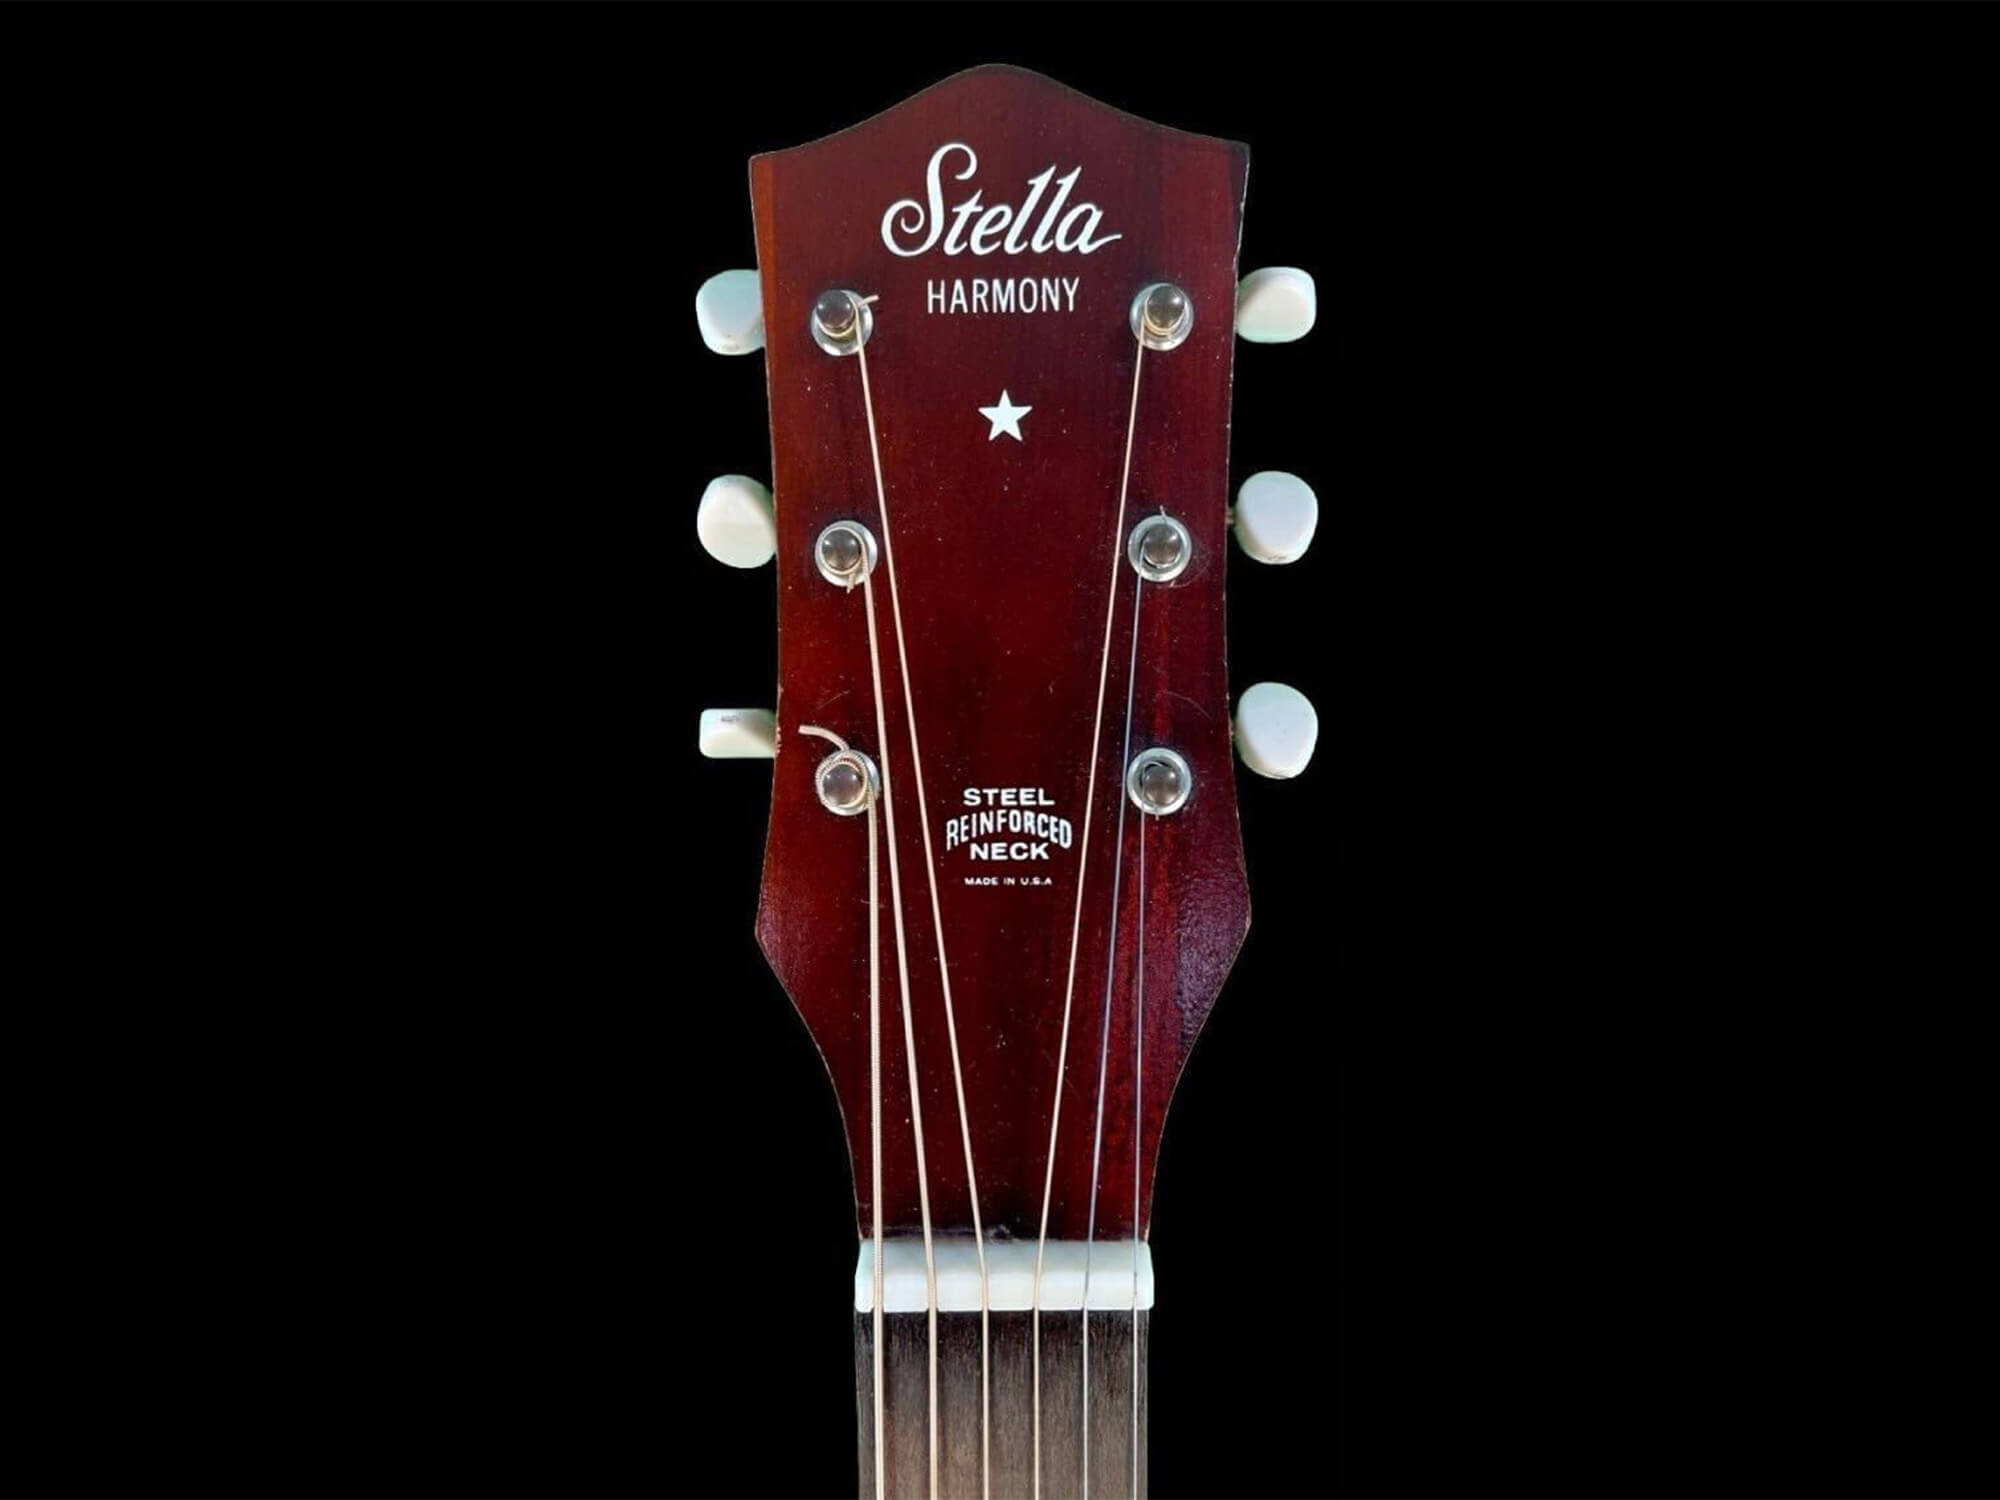 A Stella guitar, acquired by Harmony